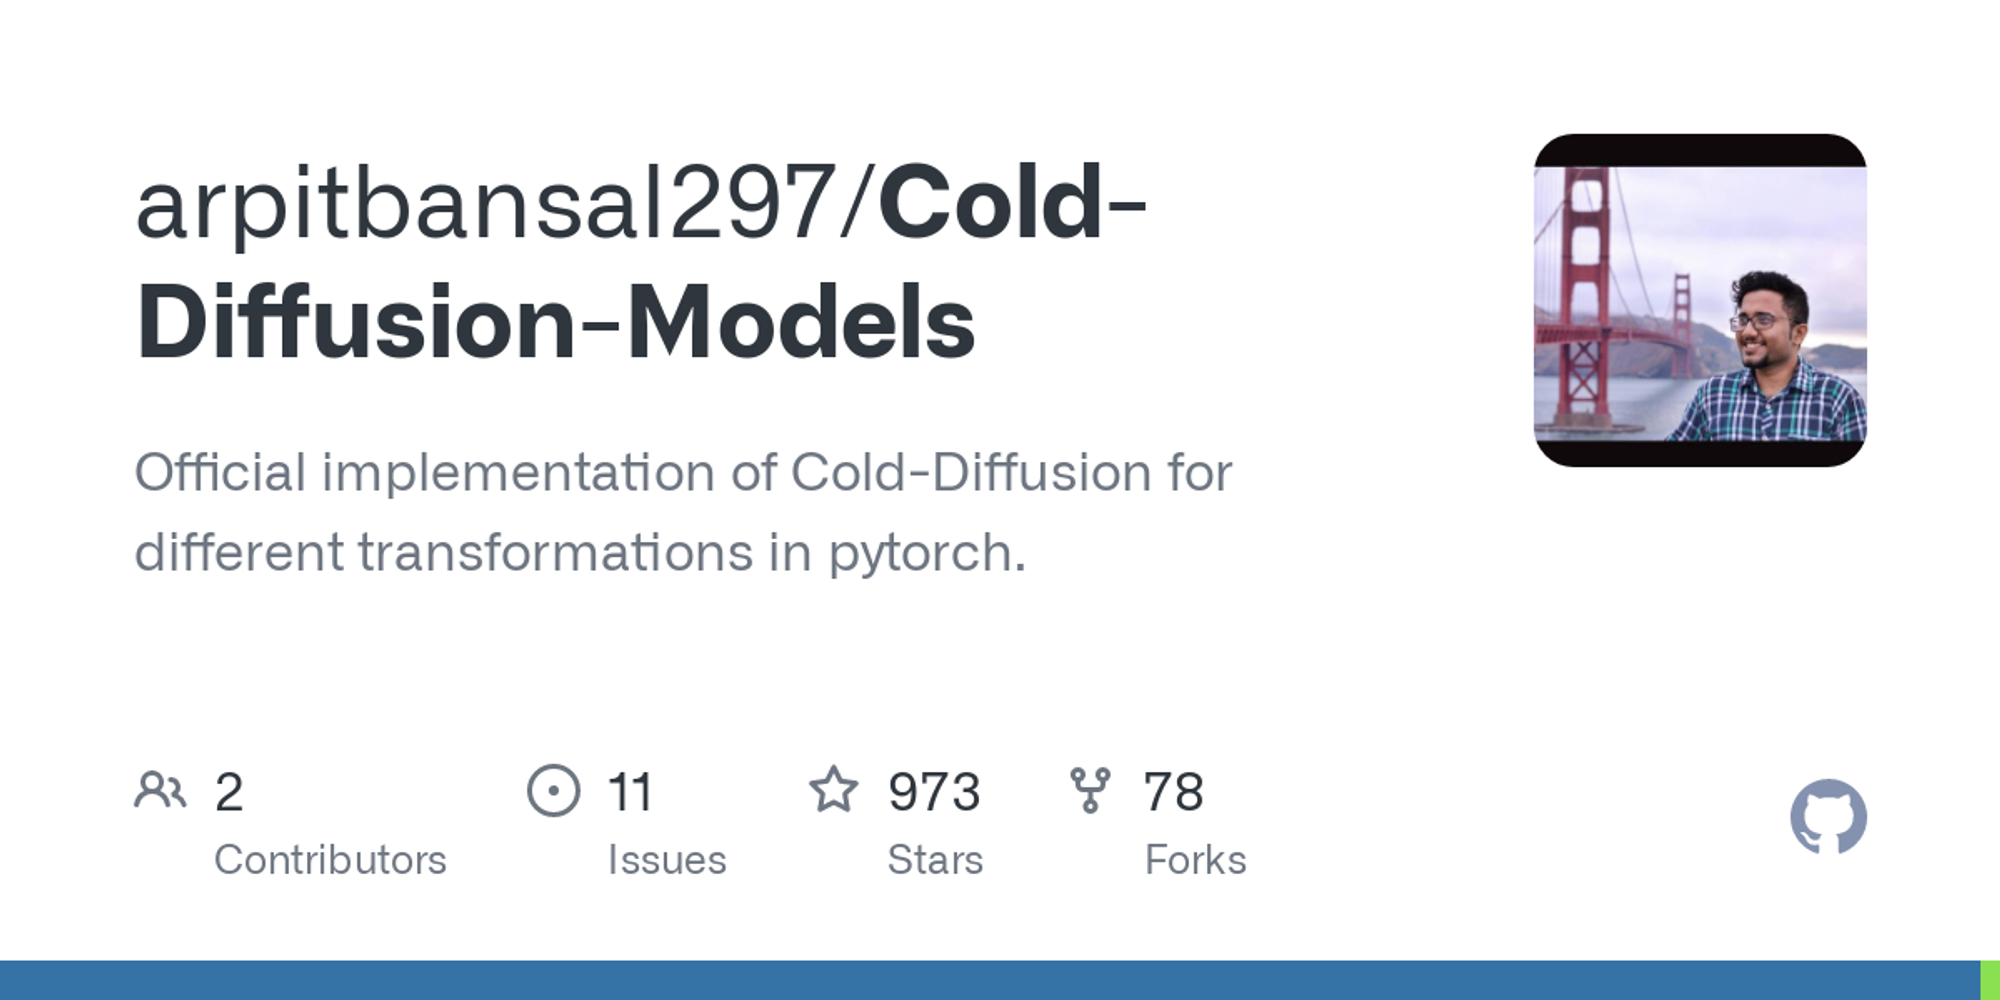 GitHub - arpitbansal297/Cold-Diffusion-Models: Official implementation of Cold-Diffusion for different transformations in pytorch.